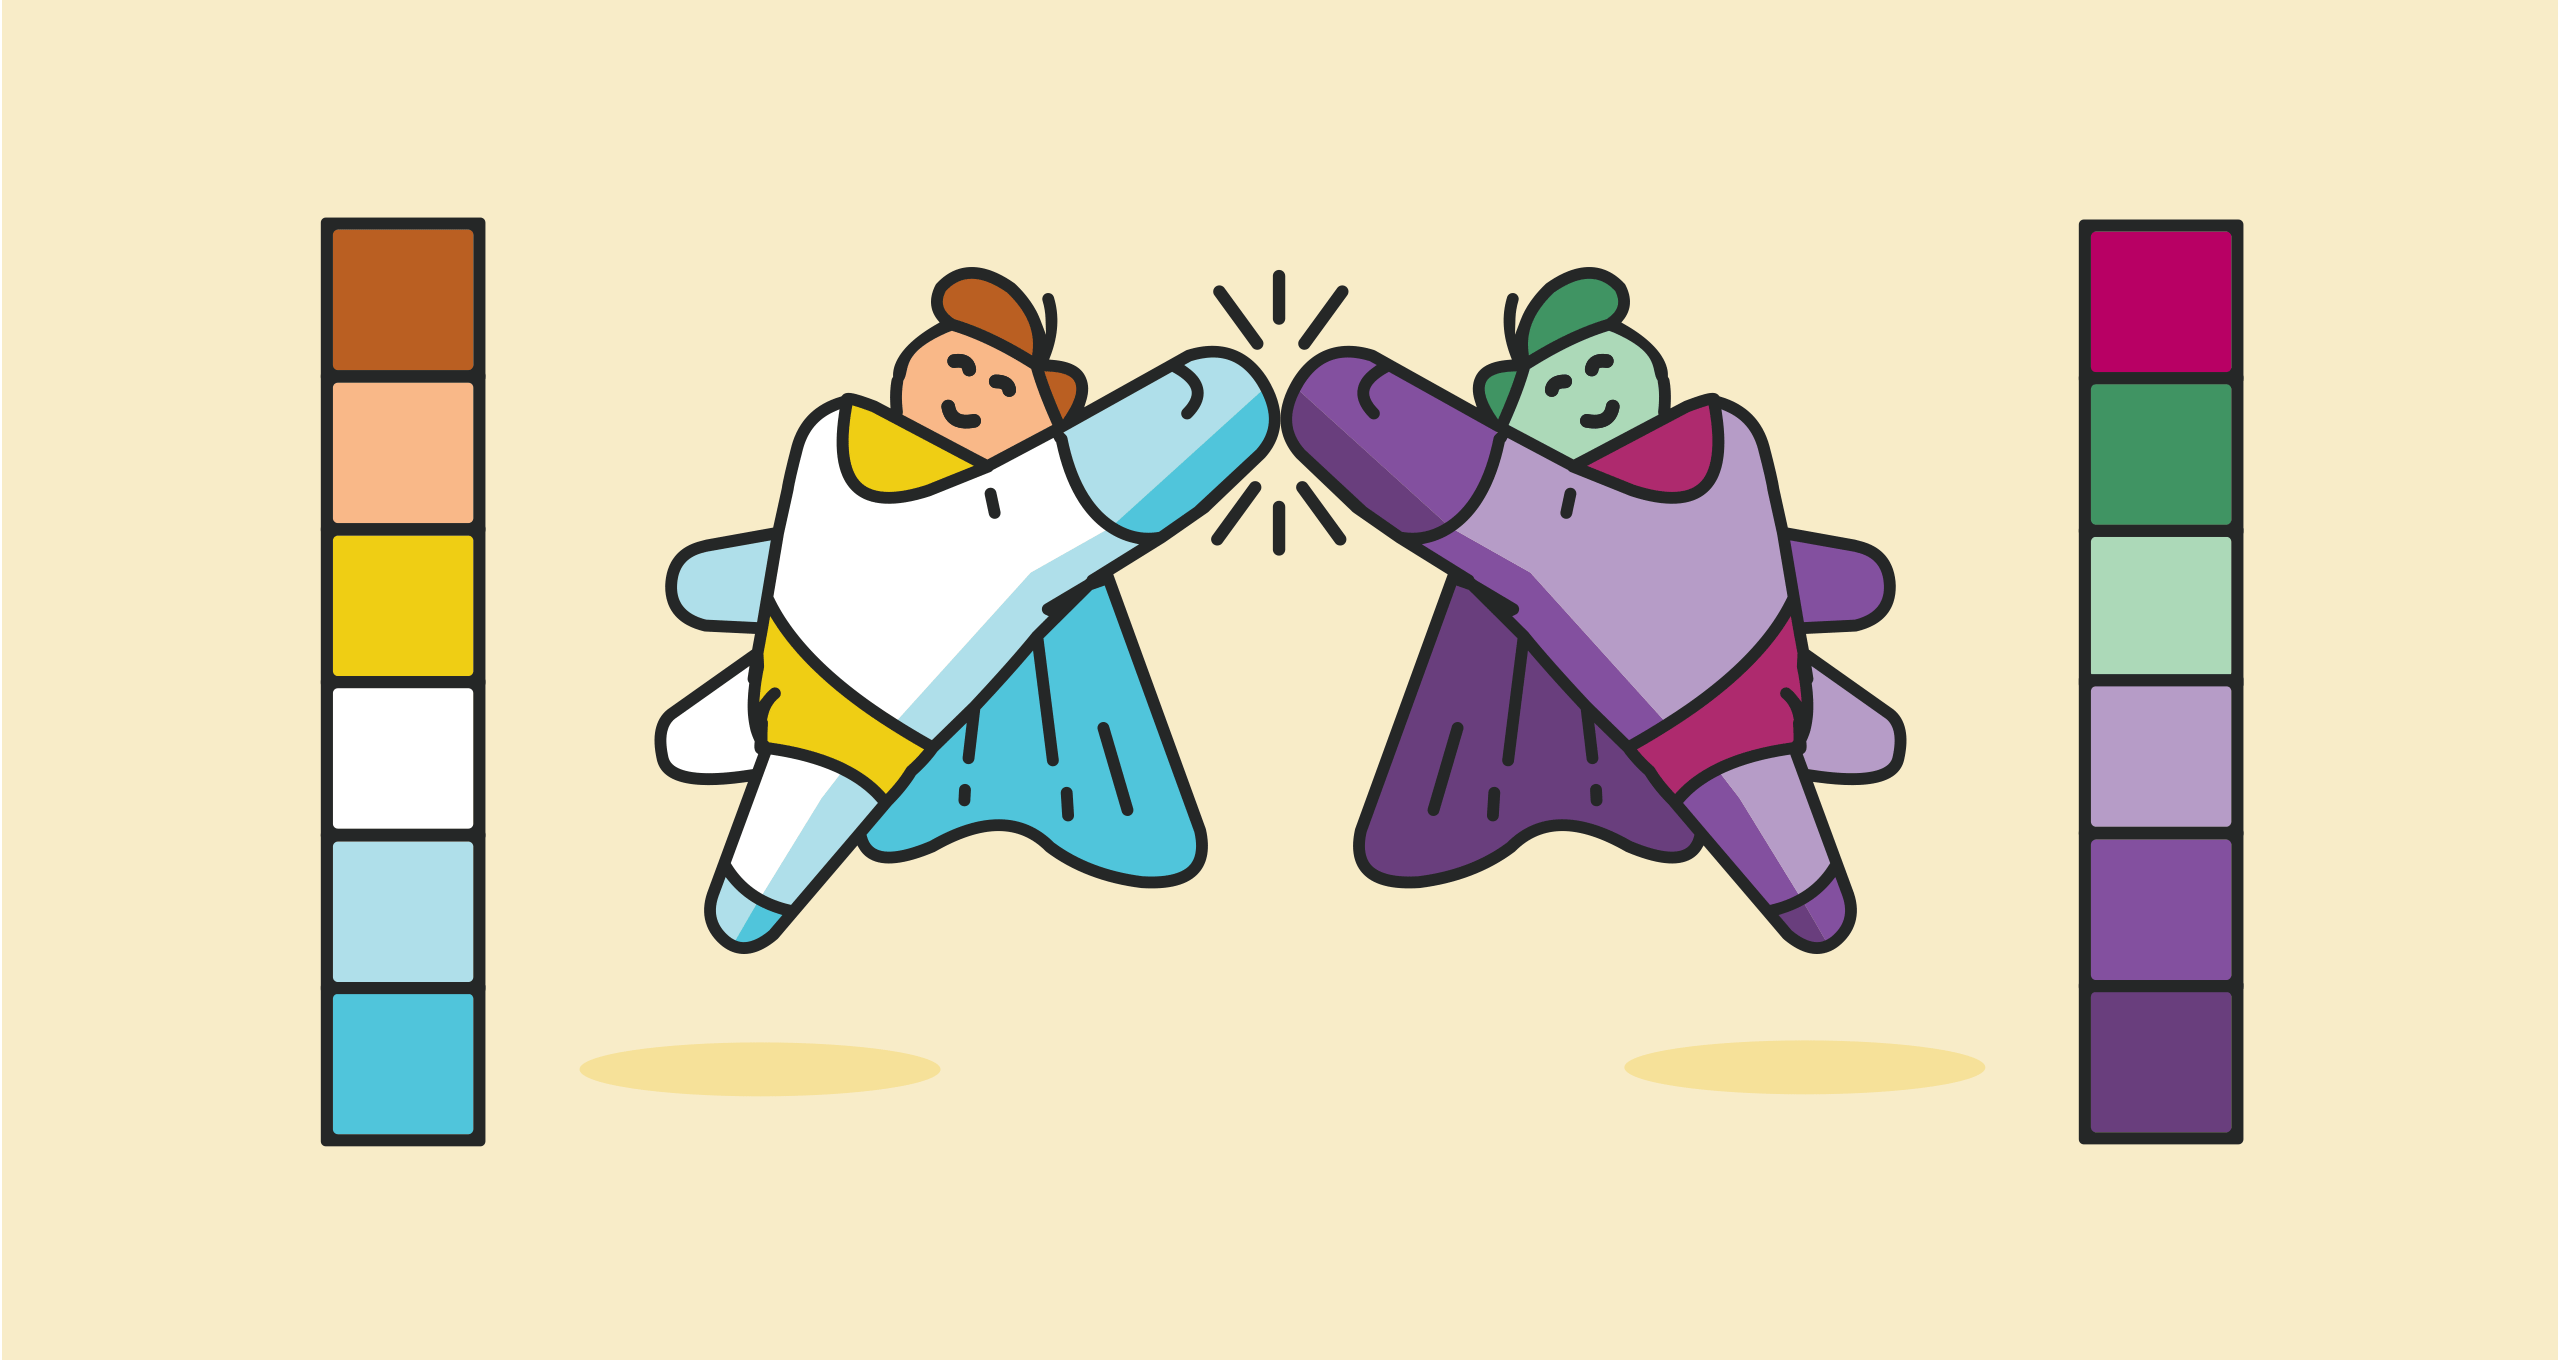 two identical icons of men in capes use different color palettes to indicate one is a hero and the other is a villain